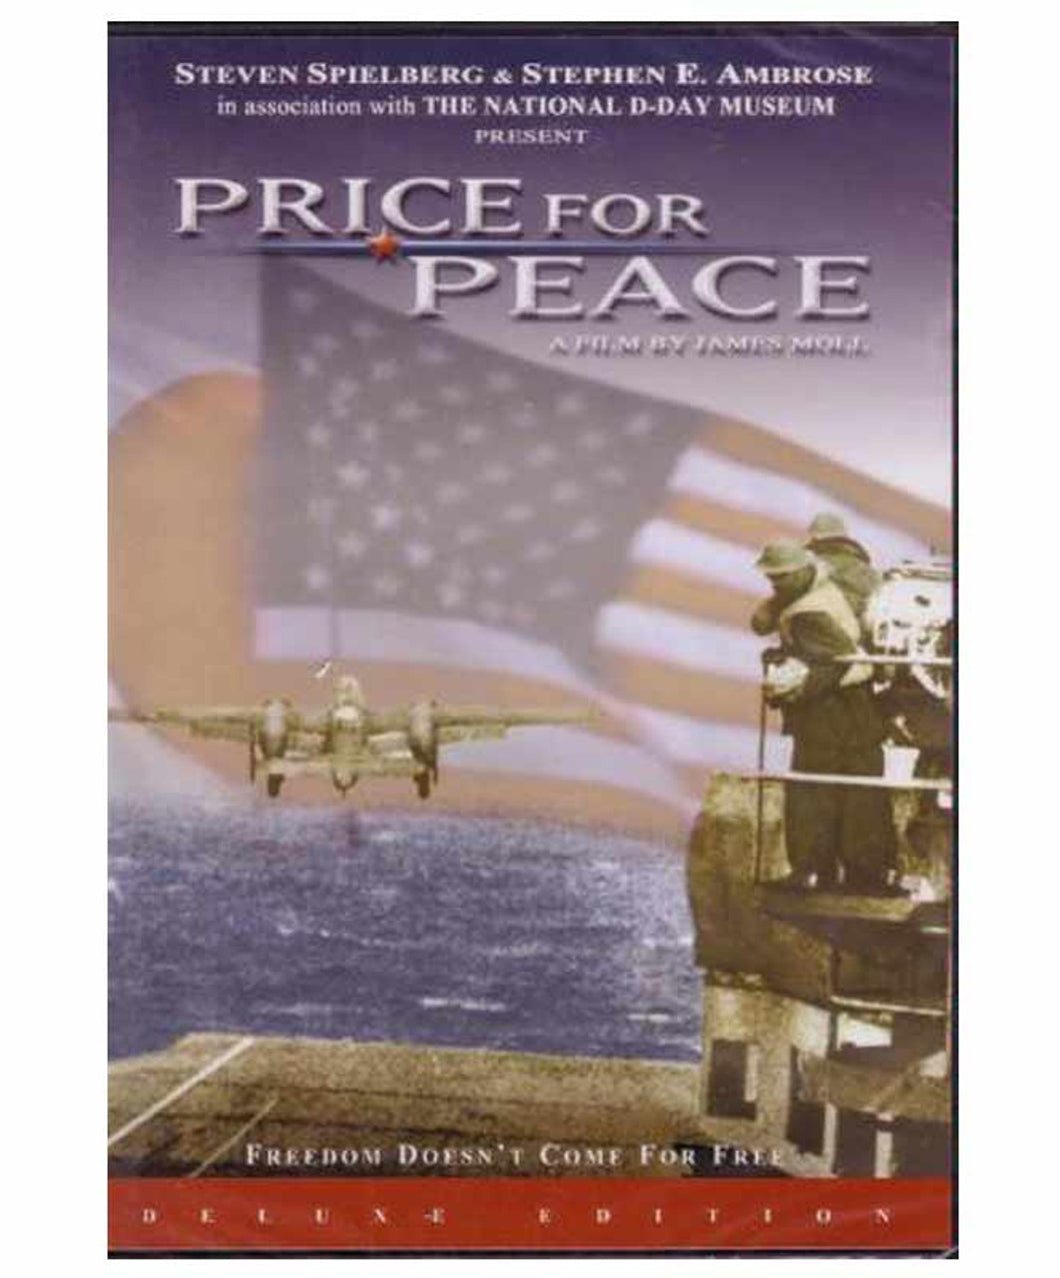 Price For Peace DVD